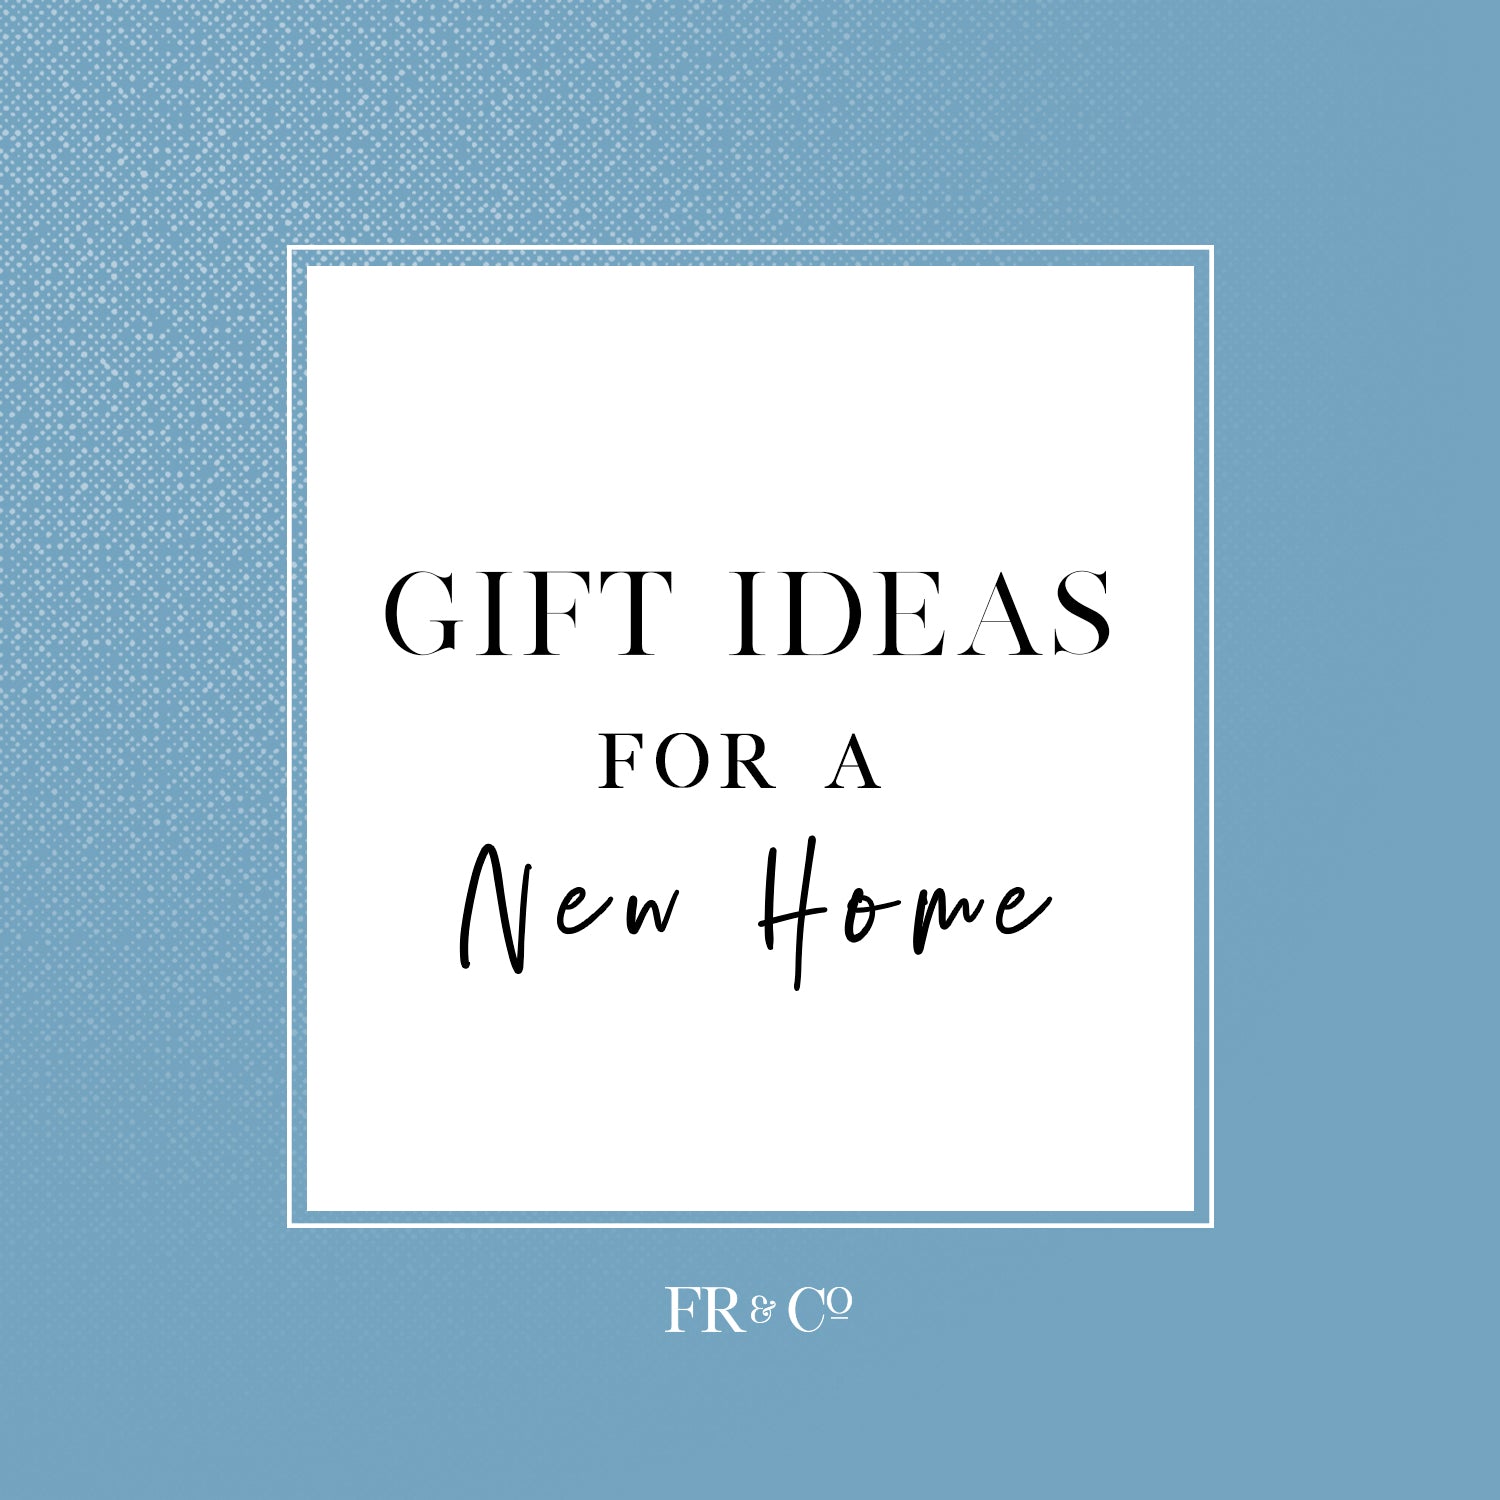 Gift Ideas for a New Home